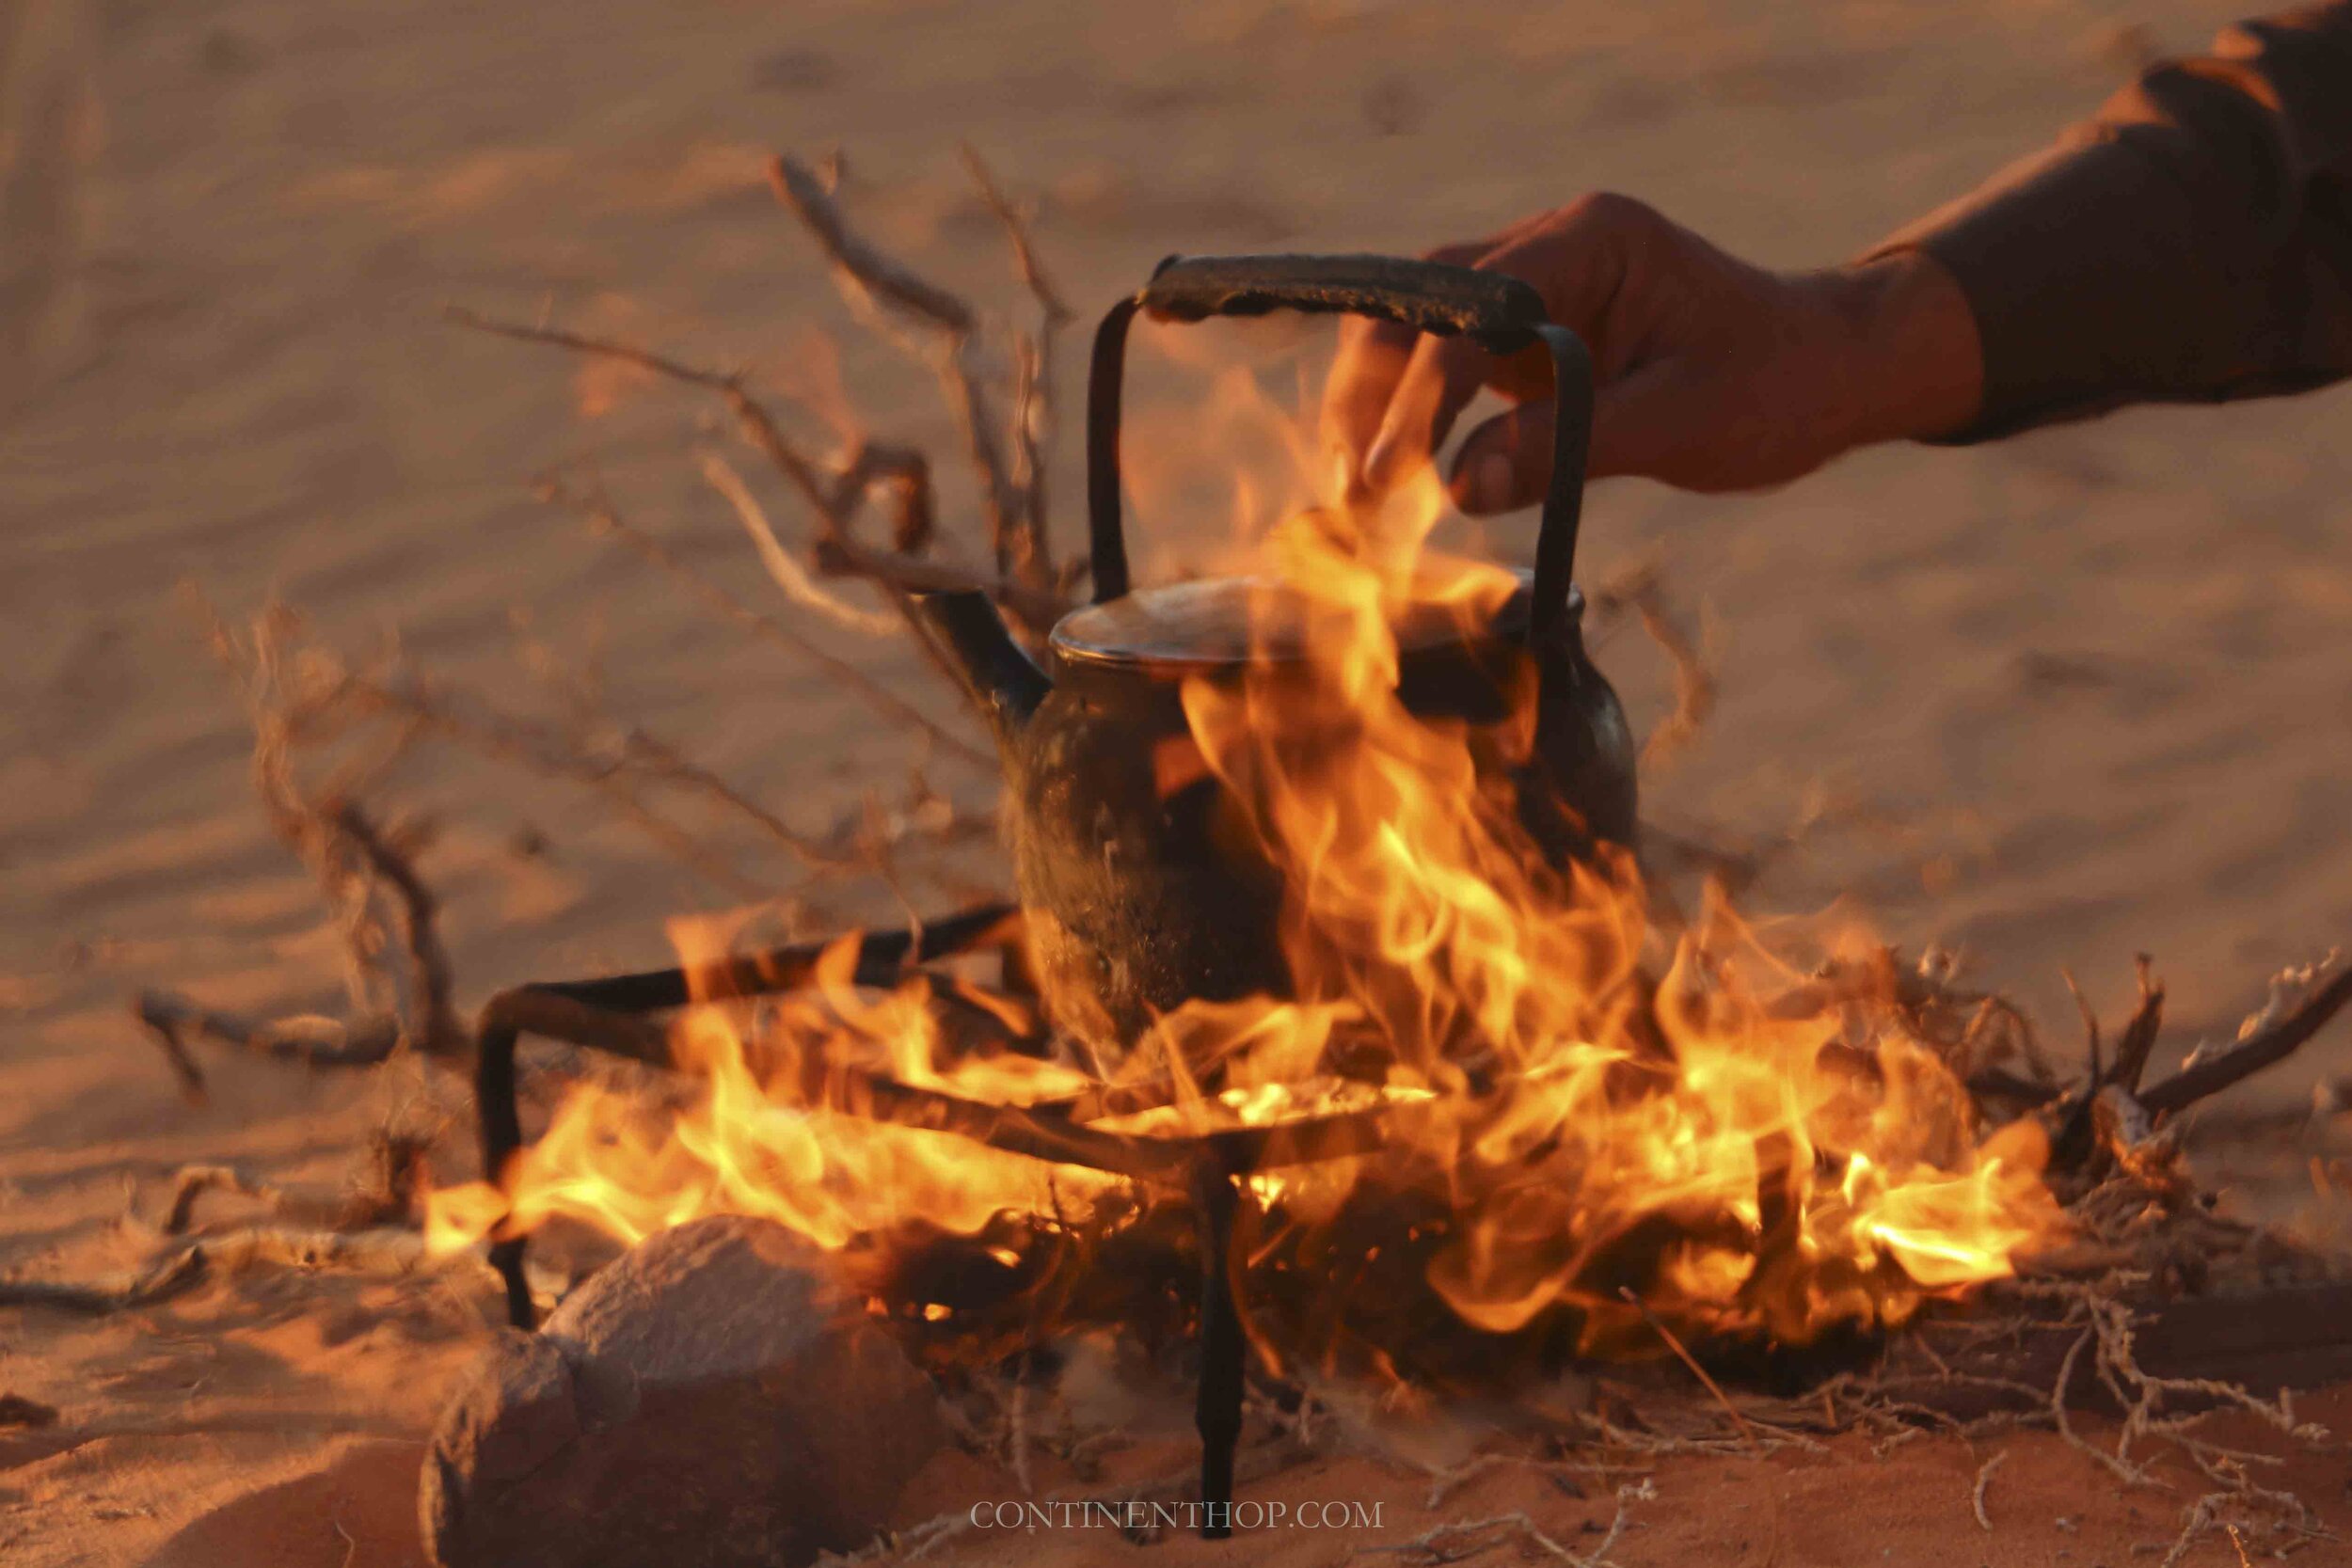 Jordan country image of a kettle placed on firewood and flames in Wadi Rum